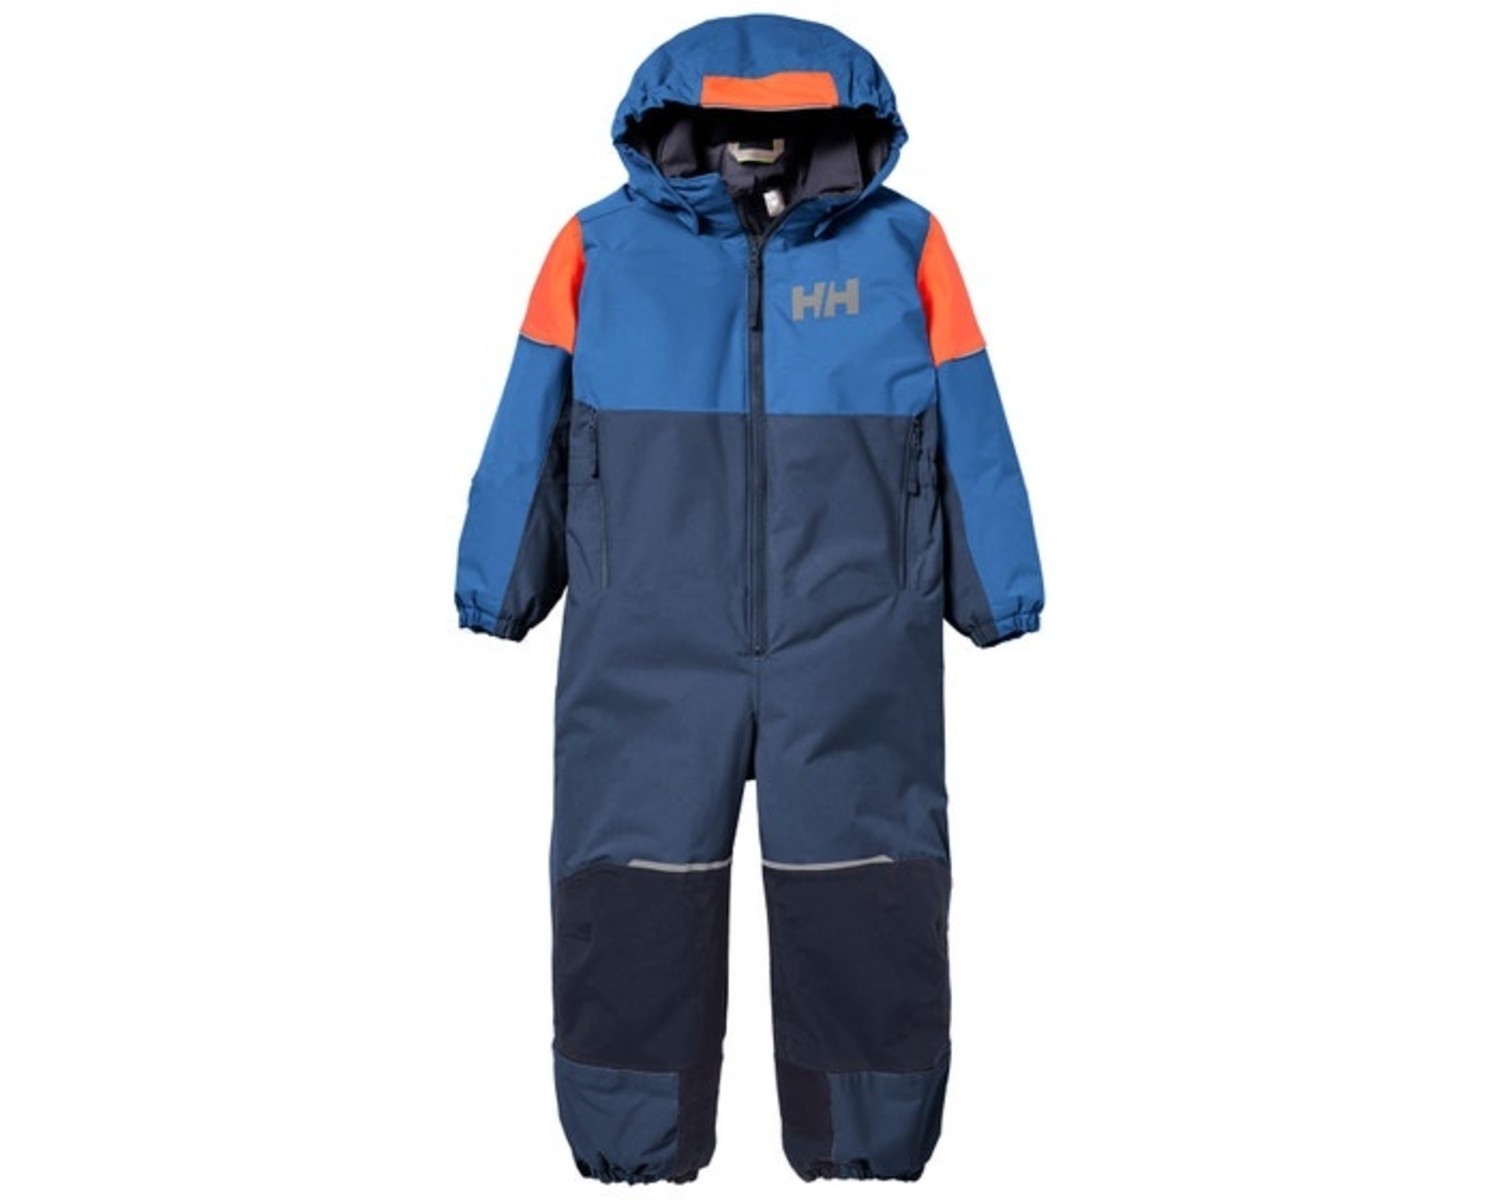 Kids Rider Insulated Snow Suit - Yellow